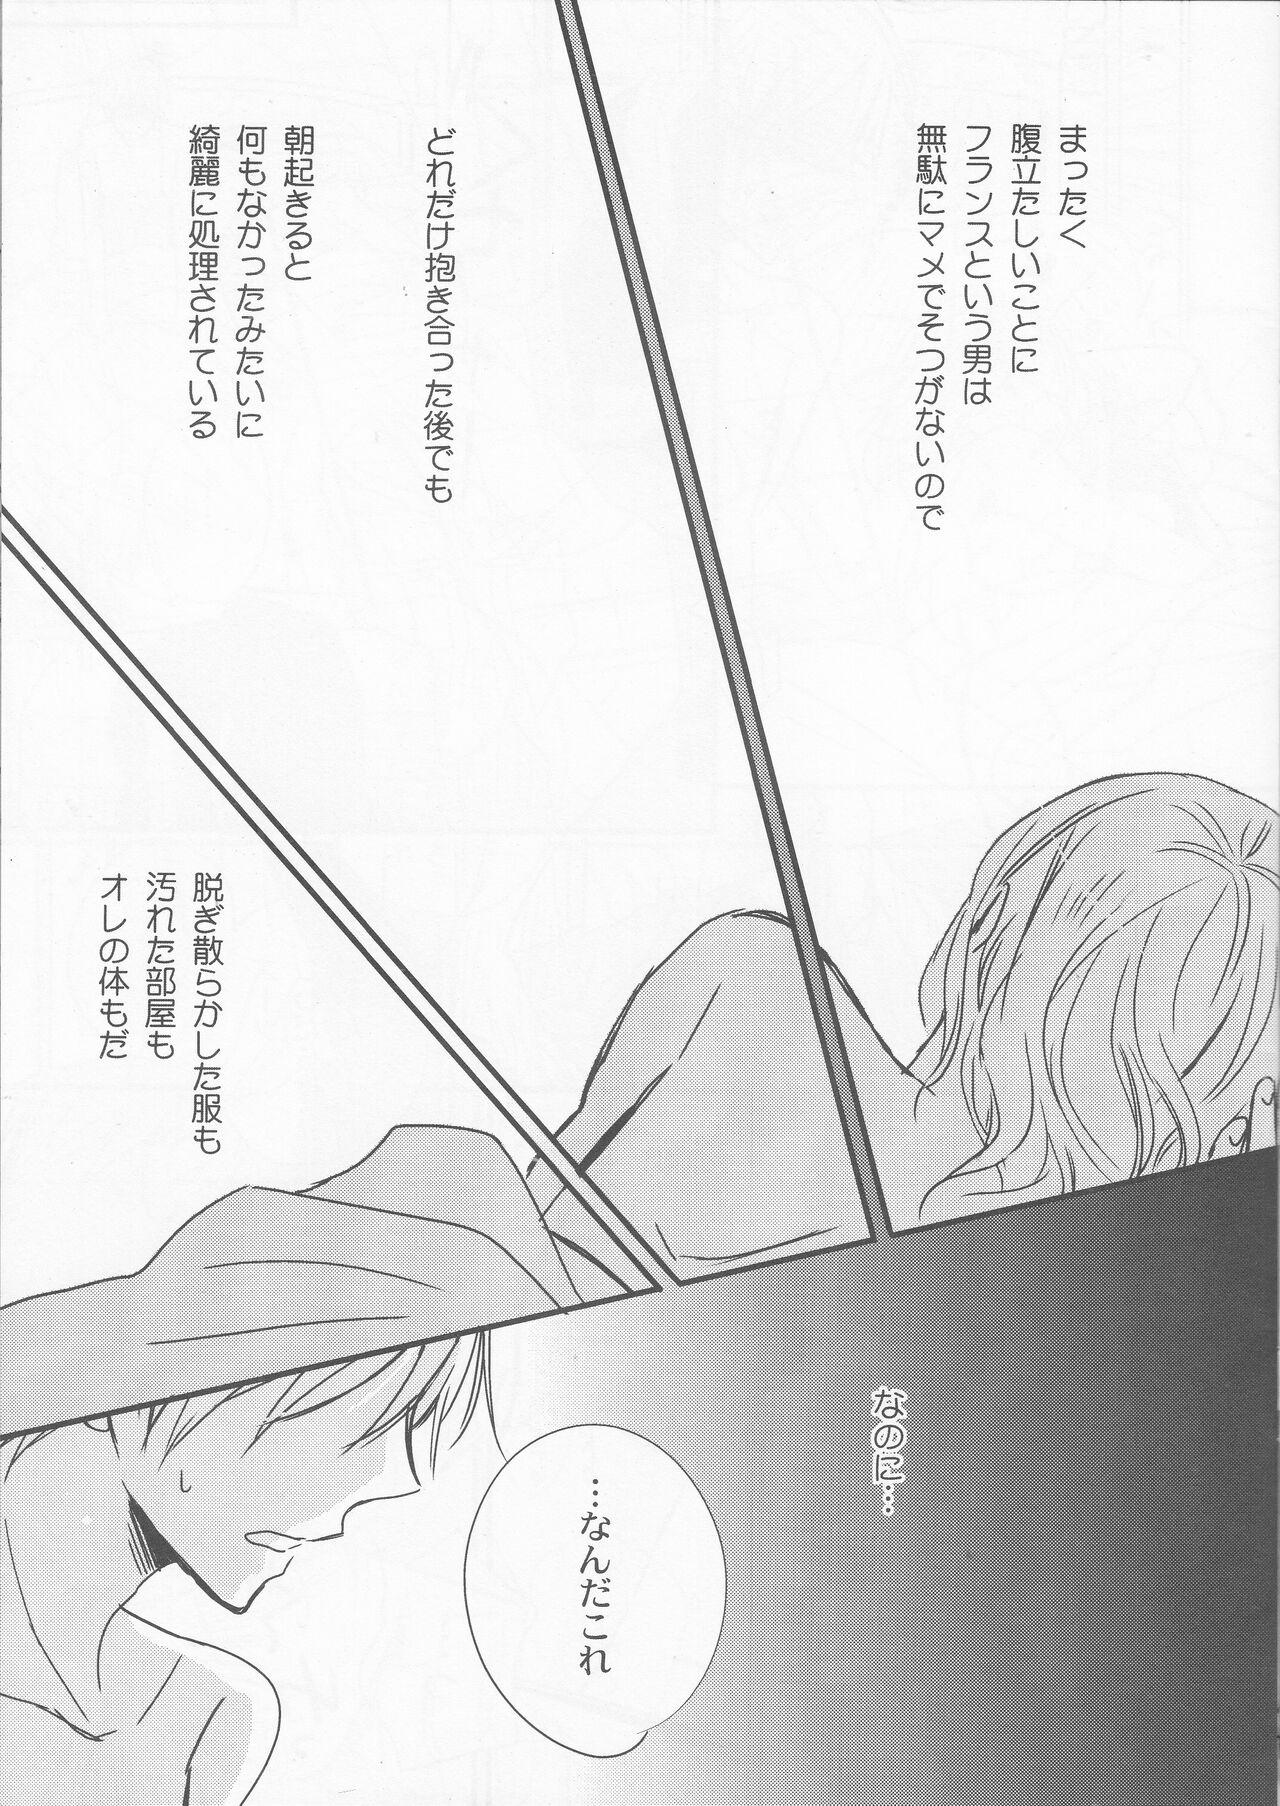 Teenage Porn unknown title - Axis powers hetalia Best Blow Job Ever - Page 4